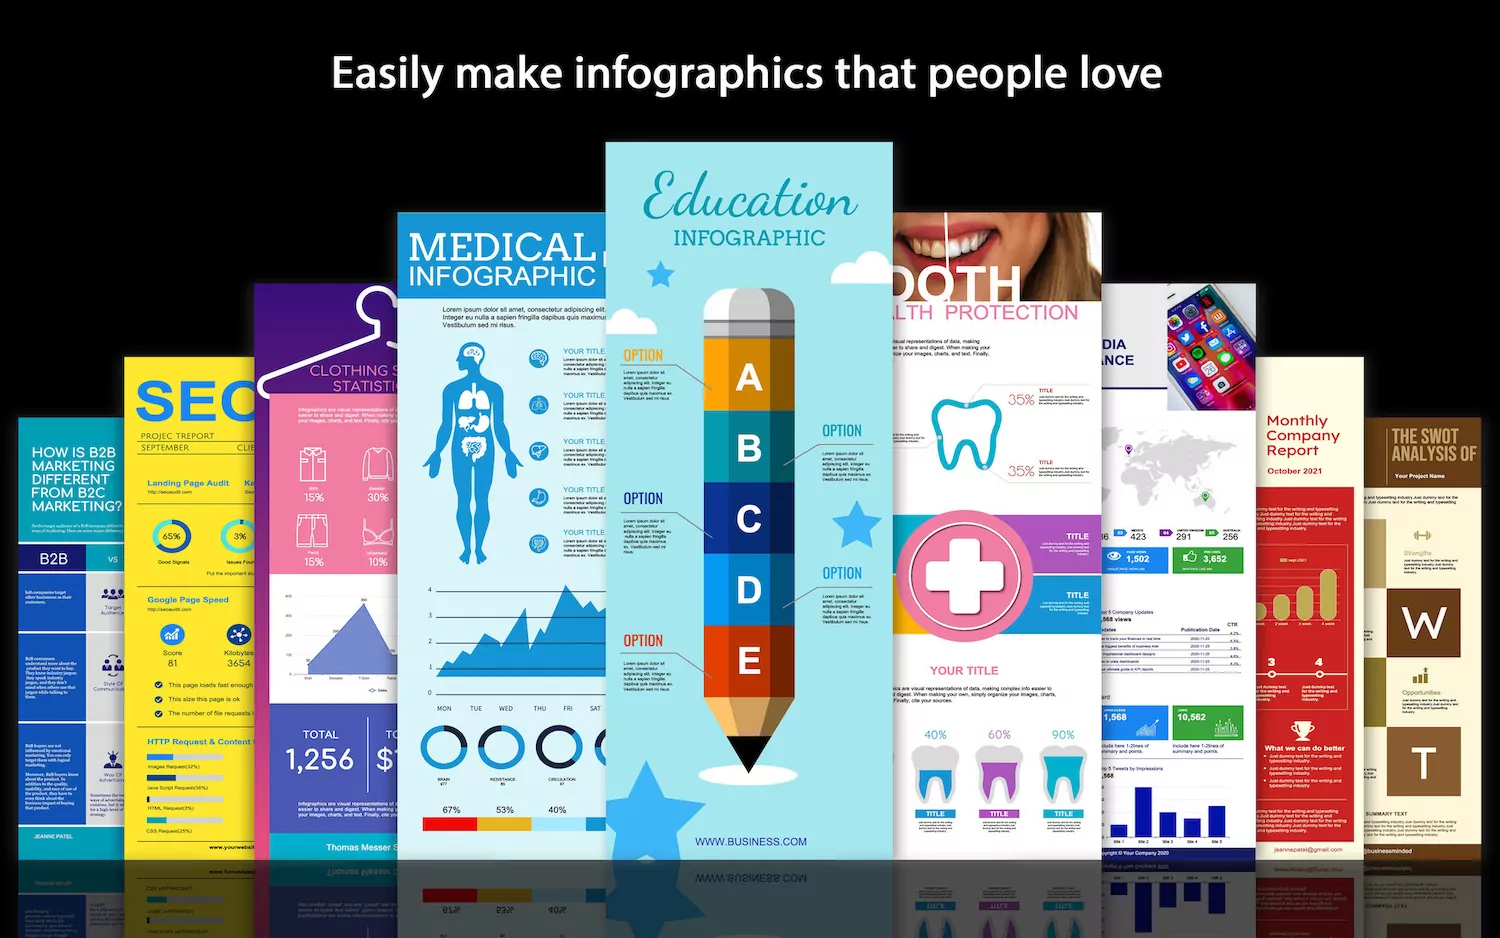 How can a beginner create an infographic that everyone loves?